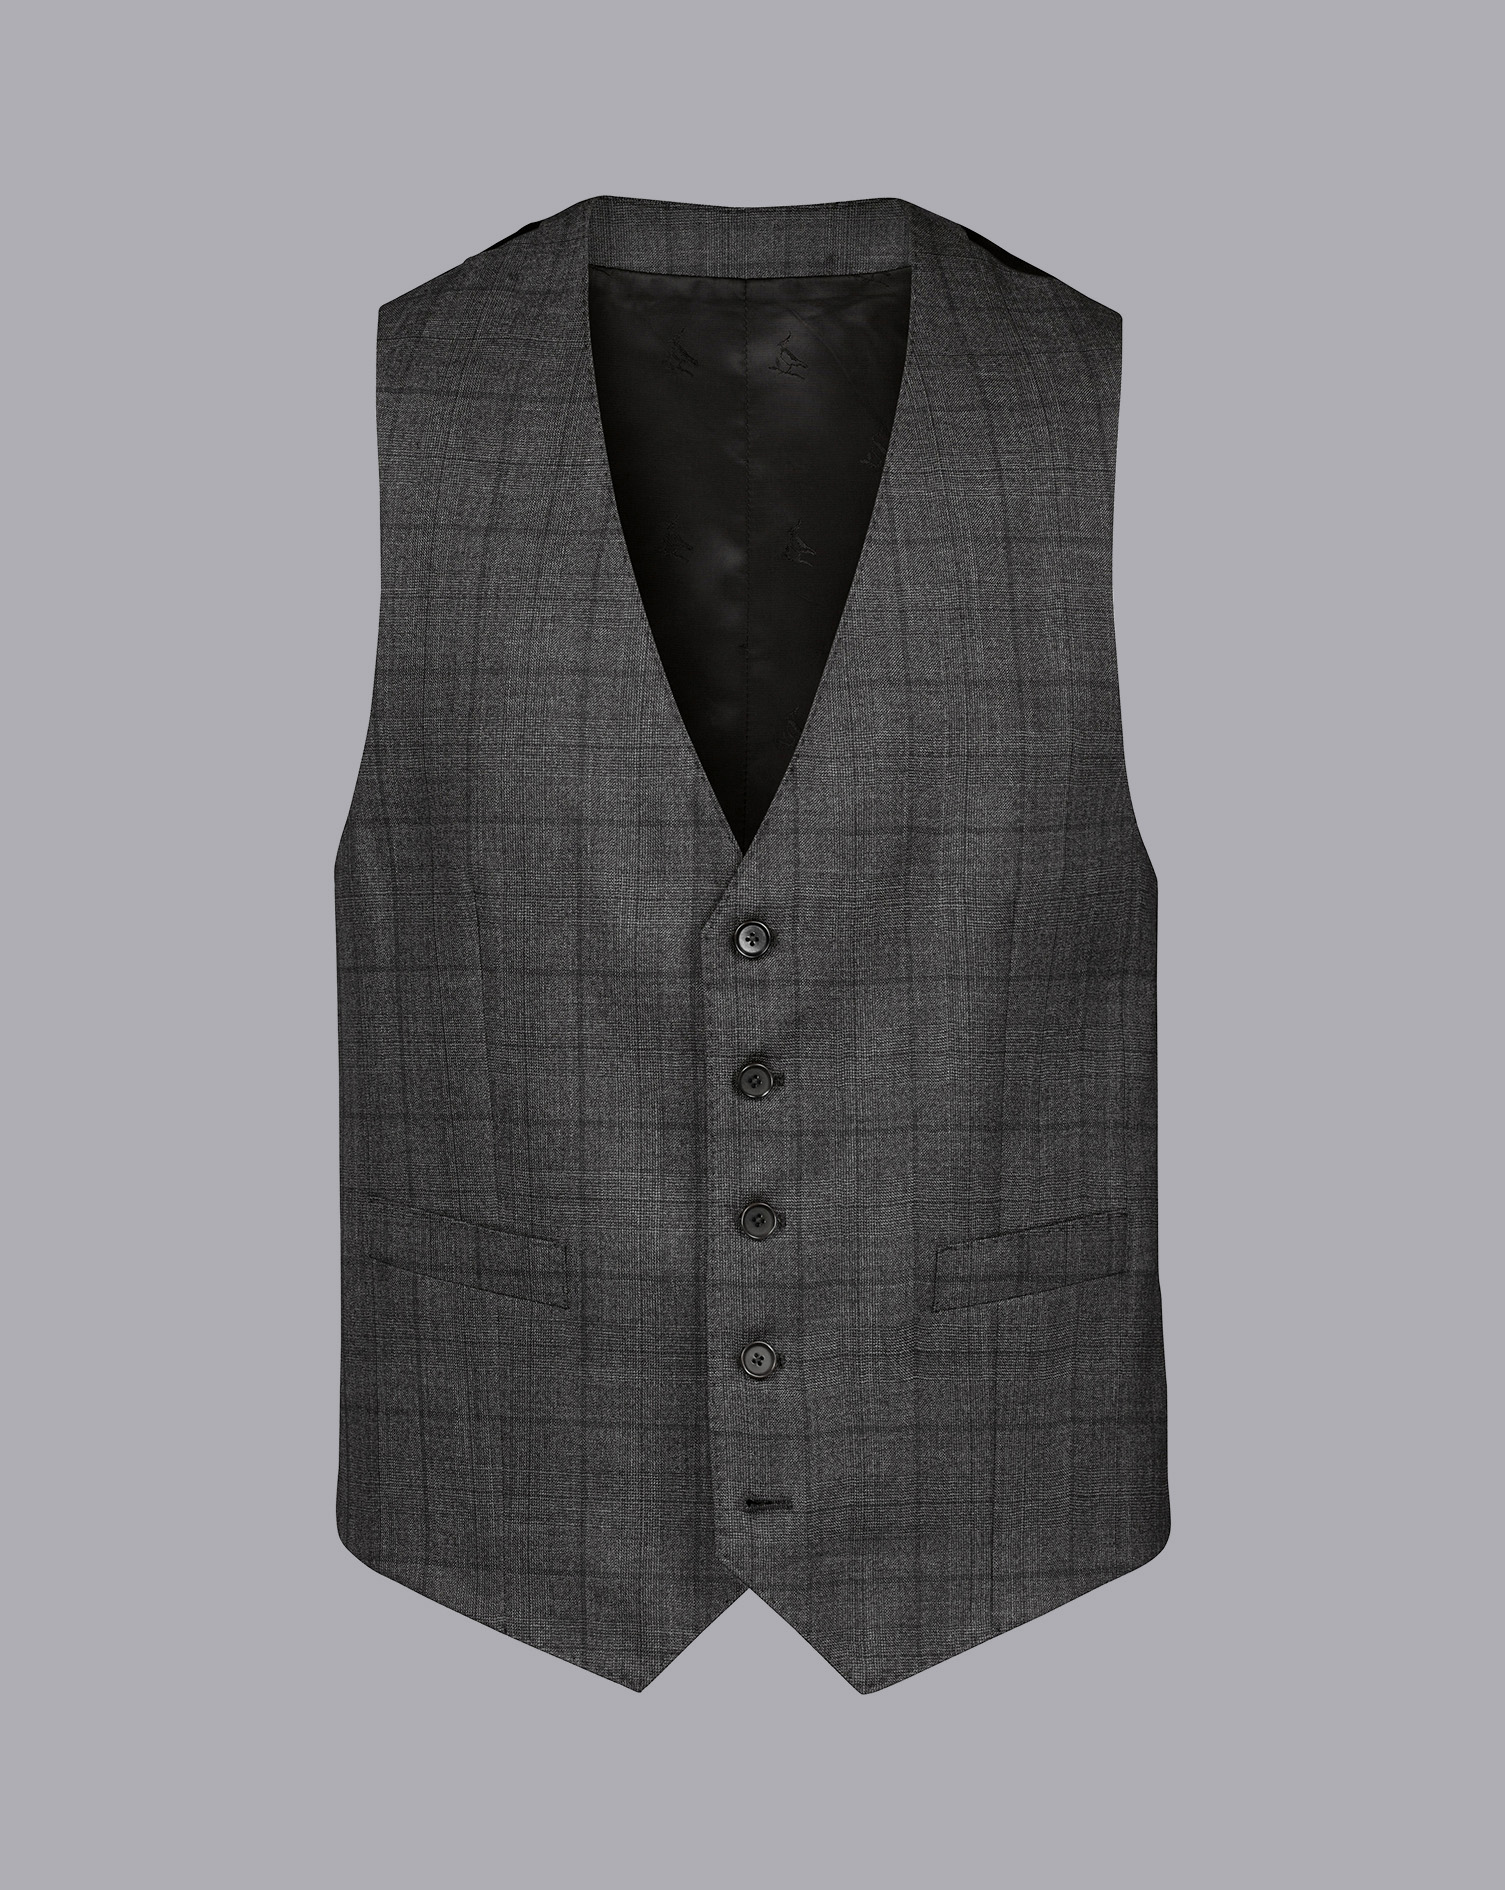 Men's Charles Tyrwhitt Ultimate Performance Check Suit Waistcoat - Charcoal Grey Size w42 Wool
